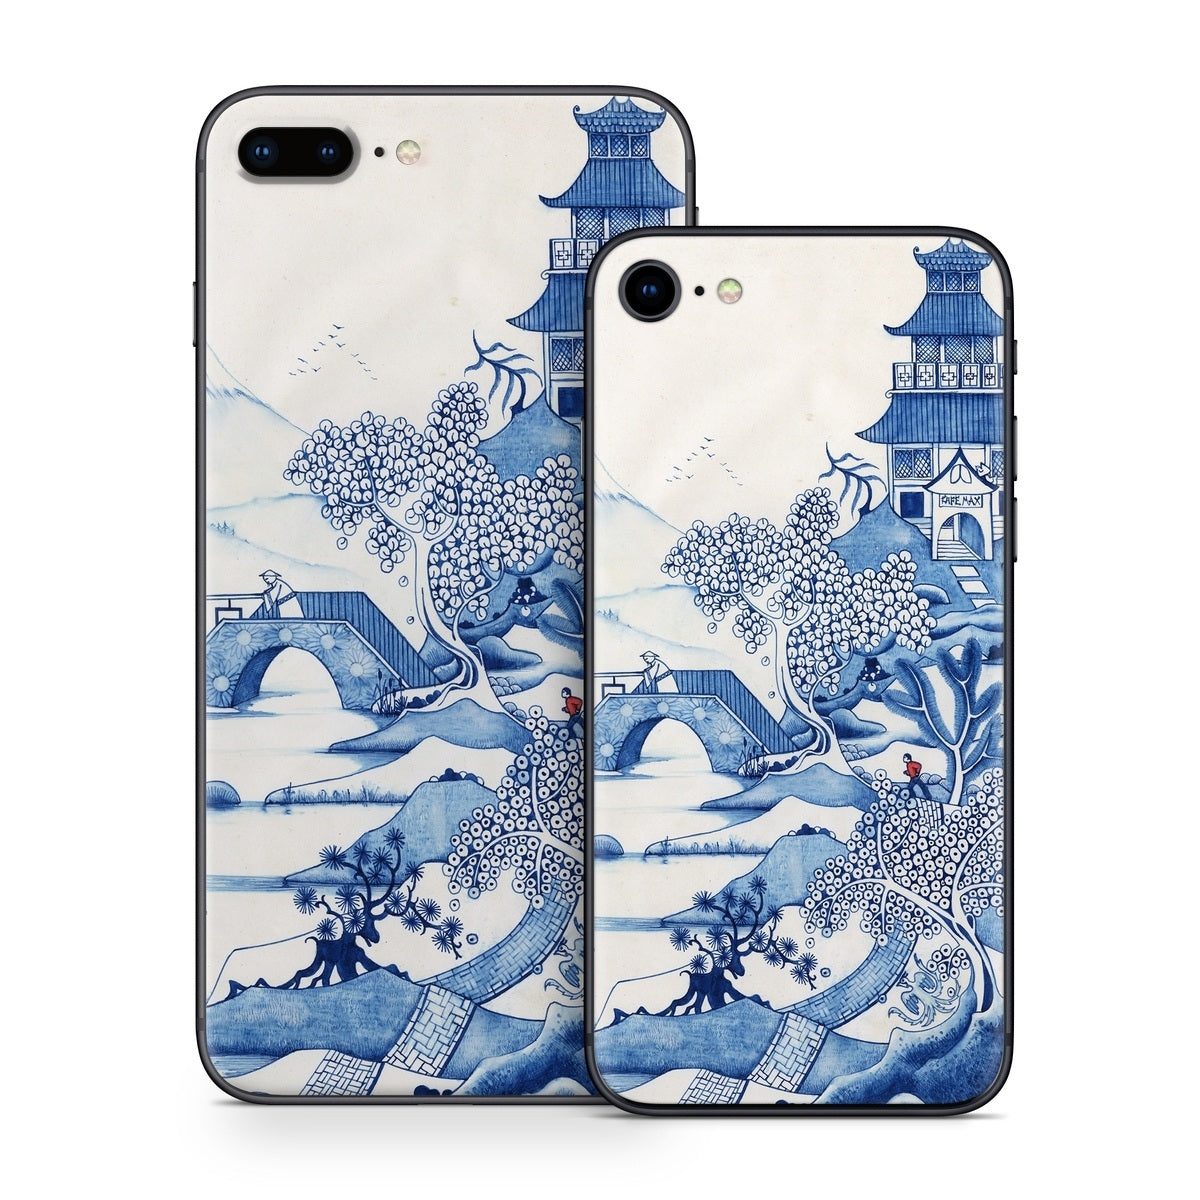 Blue Willow - Apple iPhone 8 Skin